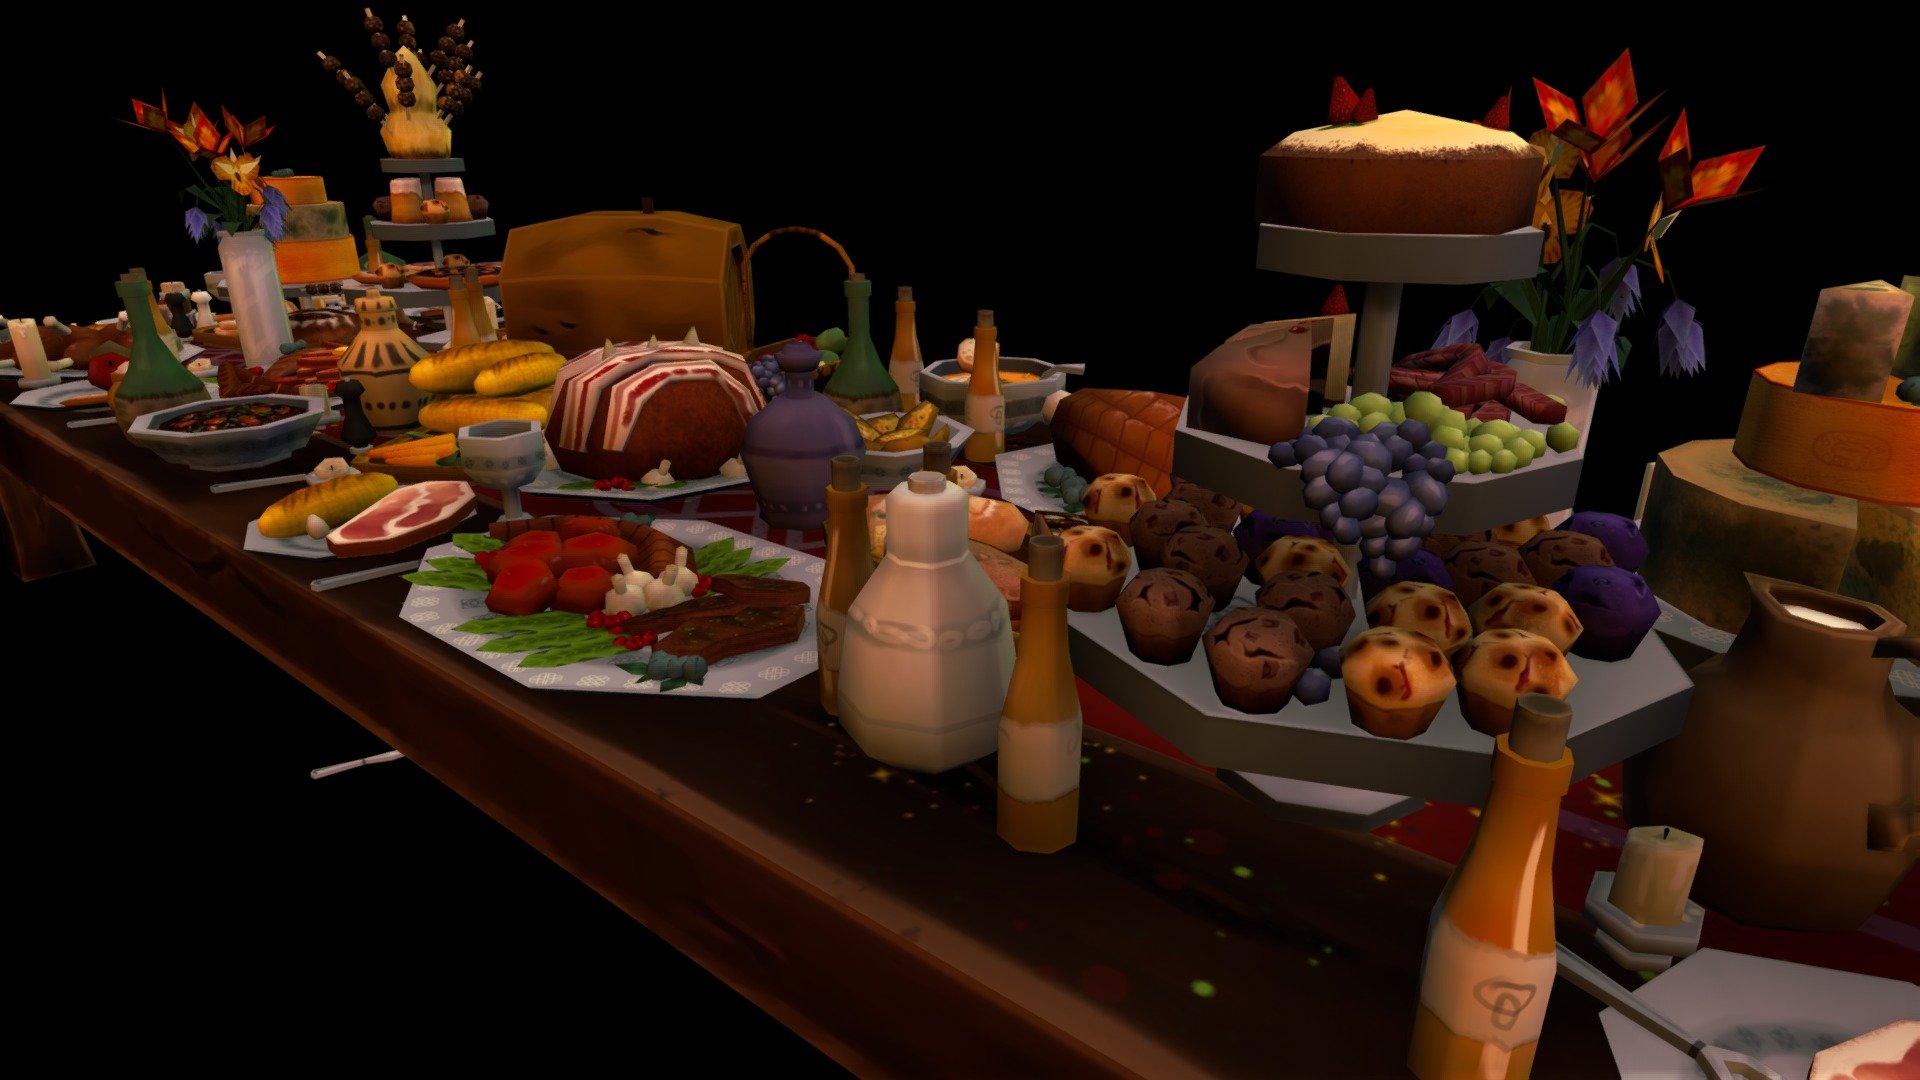 I really wanted to make an asset related to Skyrim, but it became something bigger. You can see here a few things from “The Elder Scrolls: The Official Cookbook” as well (the Horker Loaf with bacon pieces was approved by the writer herself in her Twitter lol). I’ve spent a lot of time painting a texture for each object since I really don’t know when to stop.

Except for my Vtuber avatar this is the longest of my projects, made with Blender and Substance Painter.

I hope you’ll like it.

I’ve streamed the whole process on Twitch, that’s what I normally do when I have an interesting 3D scene, so you can always come and say hi or give me a professional advice. I’m in 3D for 11 months so need an advice quite often ._. https://www.twitch.tv/aspiecow

The set consists of 93 original objects (6.8K faces, 11.3K triangles), the final scene is 23.2K /38.2K and 9 xture files.

Available on CubeBrush, Unity Asset Store and Artstation Store 3d model